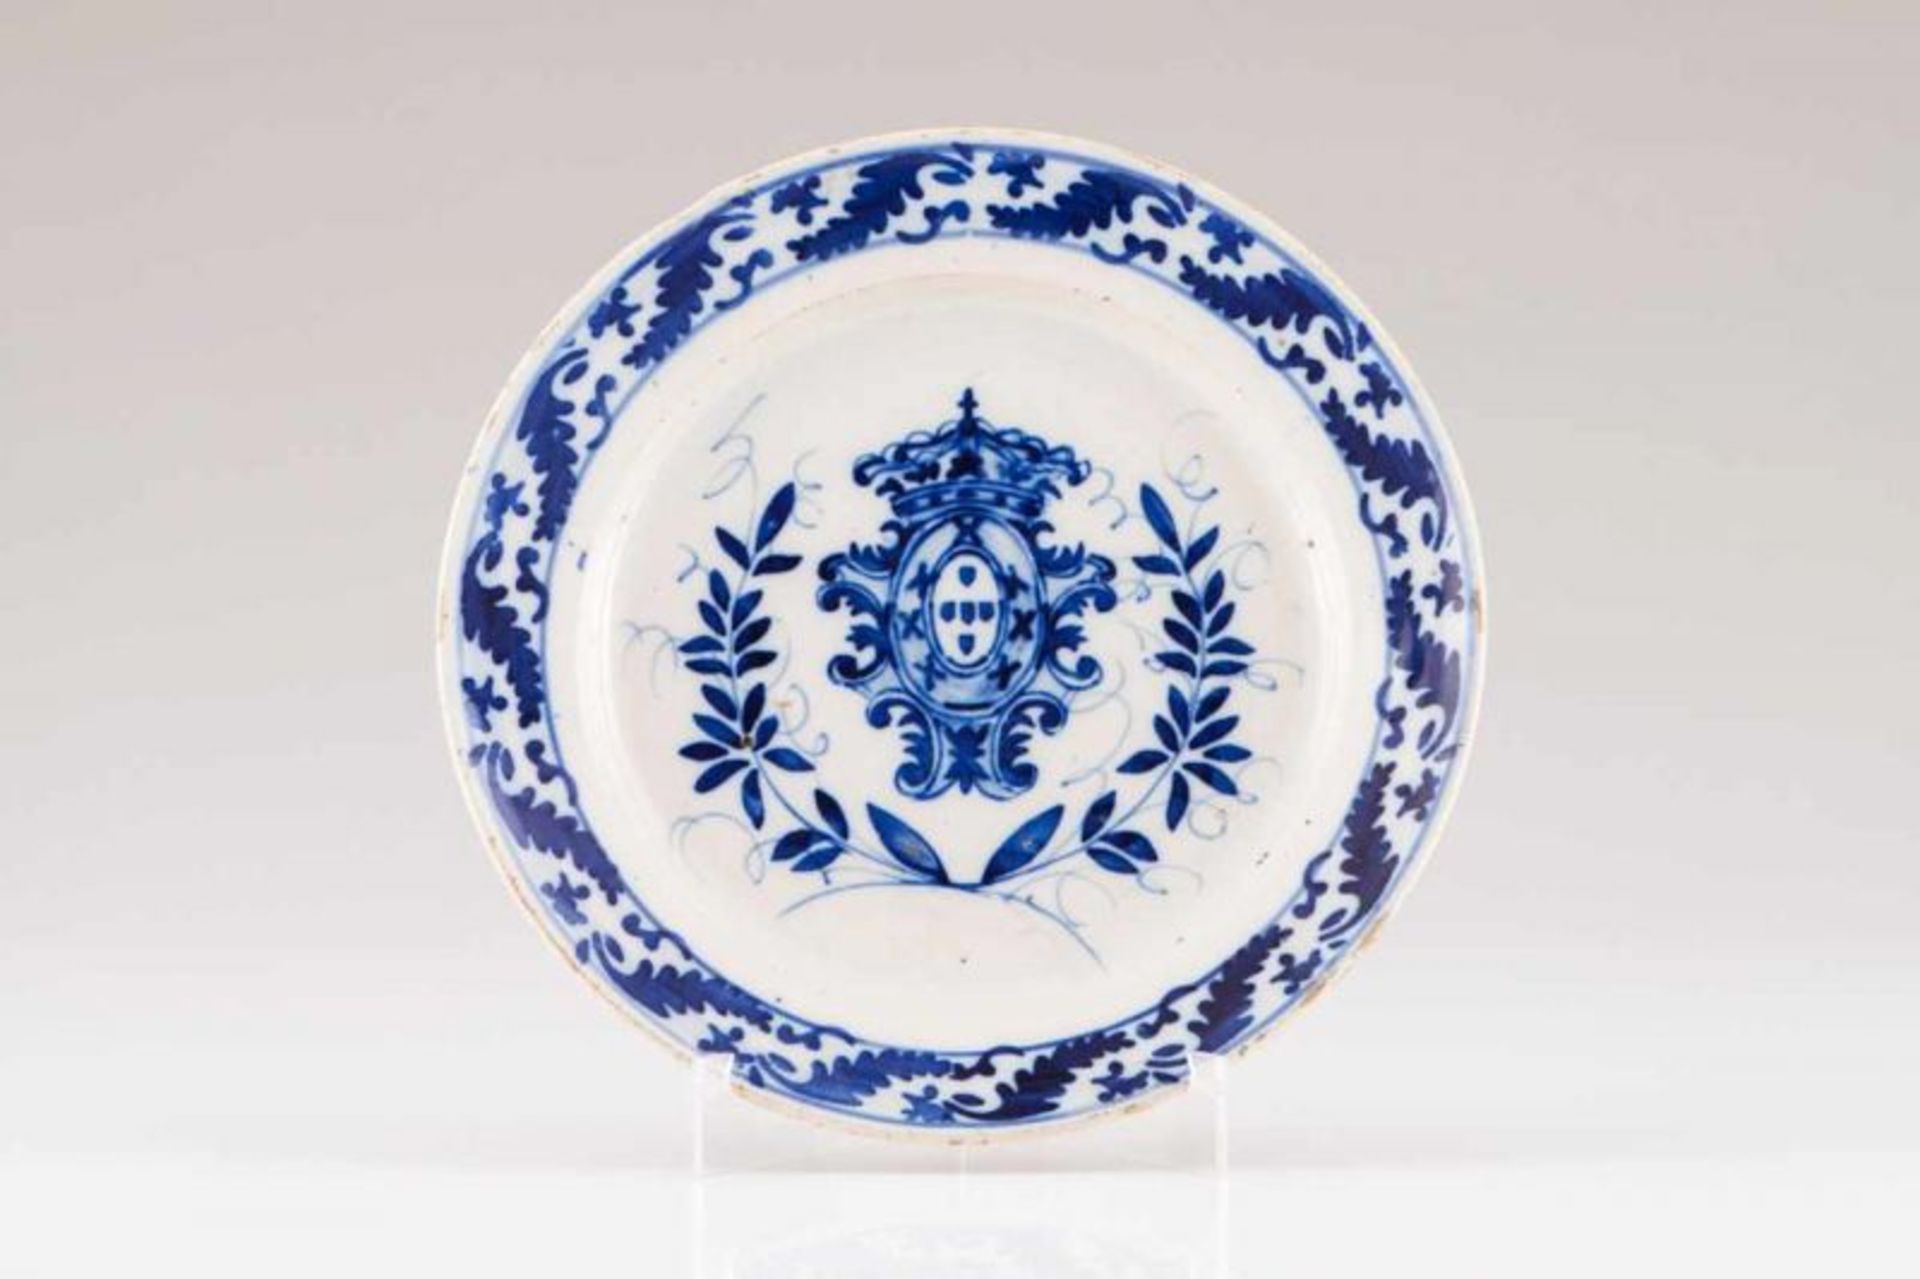 A plate Portuguese faience Blue decoration, centre bearing Portugal's coat-of-arms and floral motifs